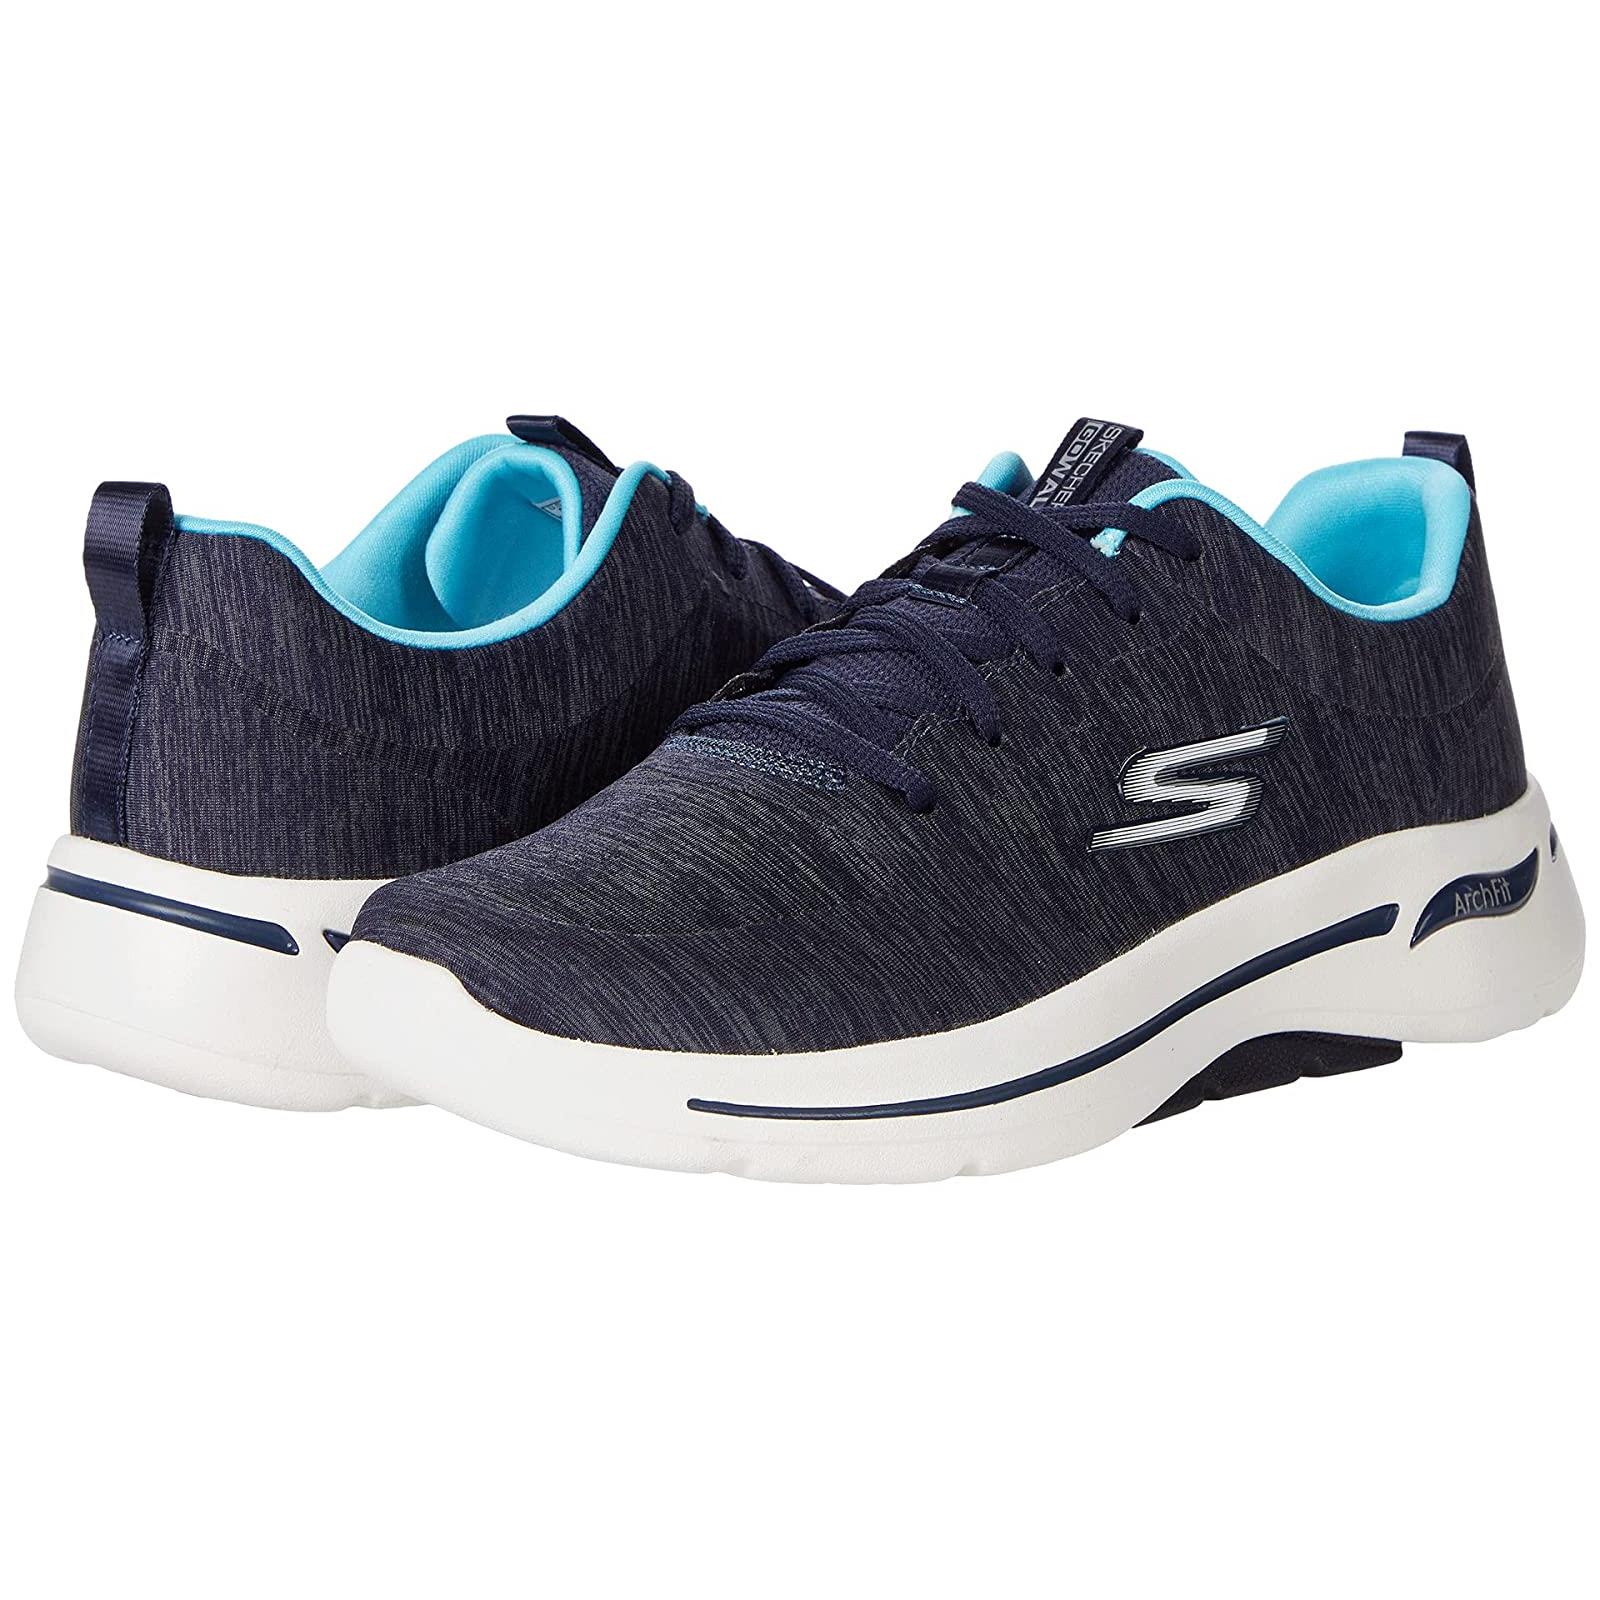 Woman`s Shoes Skechers Performance Go Walk Arch Fit Moon Shadows Navy